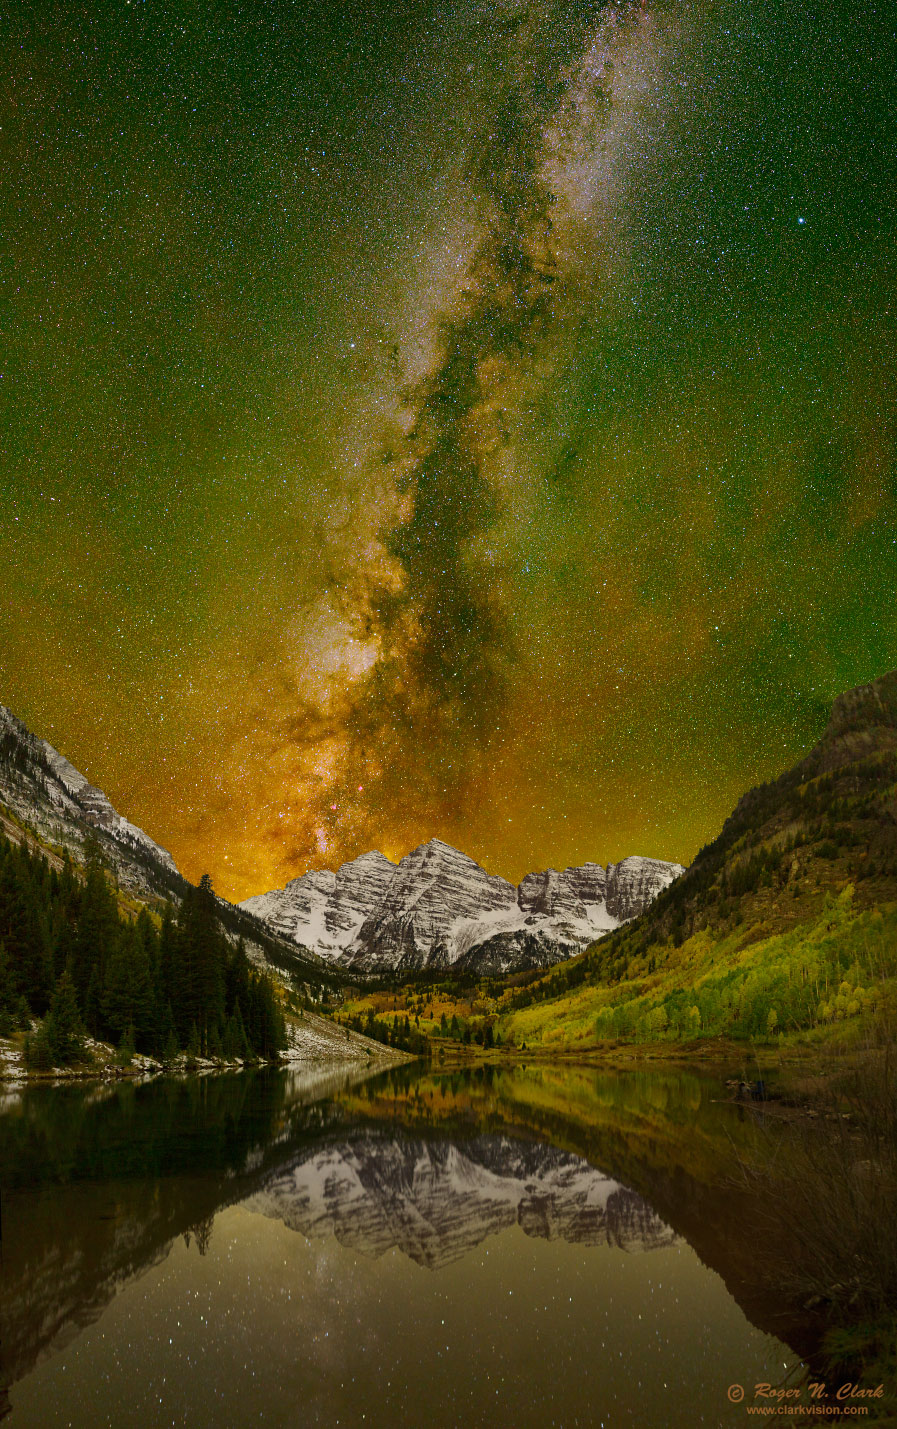 image maroon-bells_nightscape_rnclark_c09.28.2013.o-bin8x8s.jpg is Copyrighted by Roger N. Clark, www.clarkvision.com